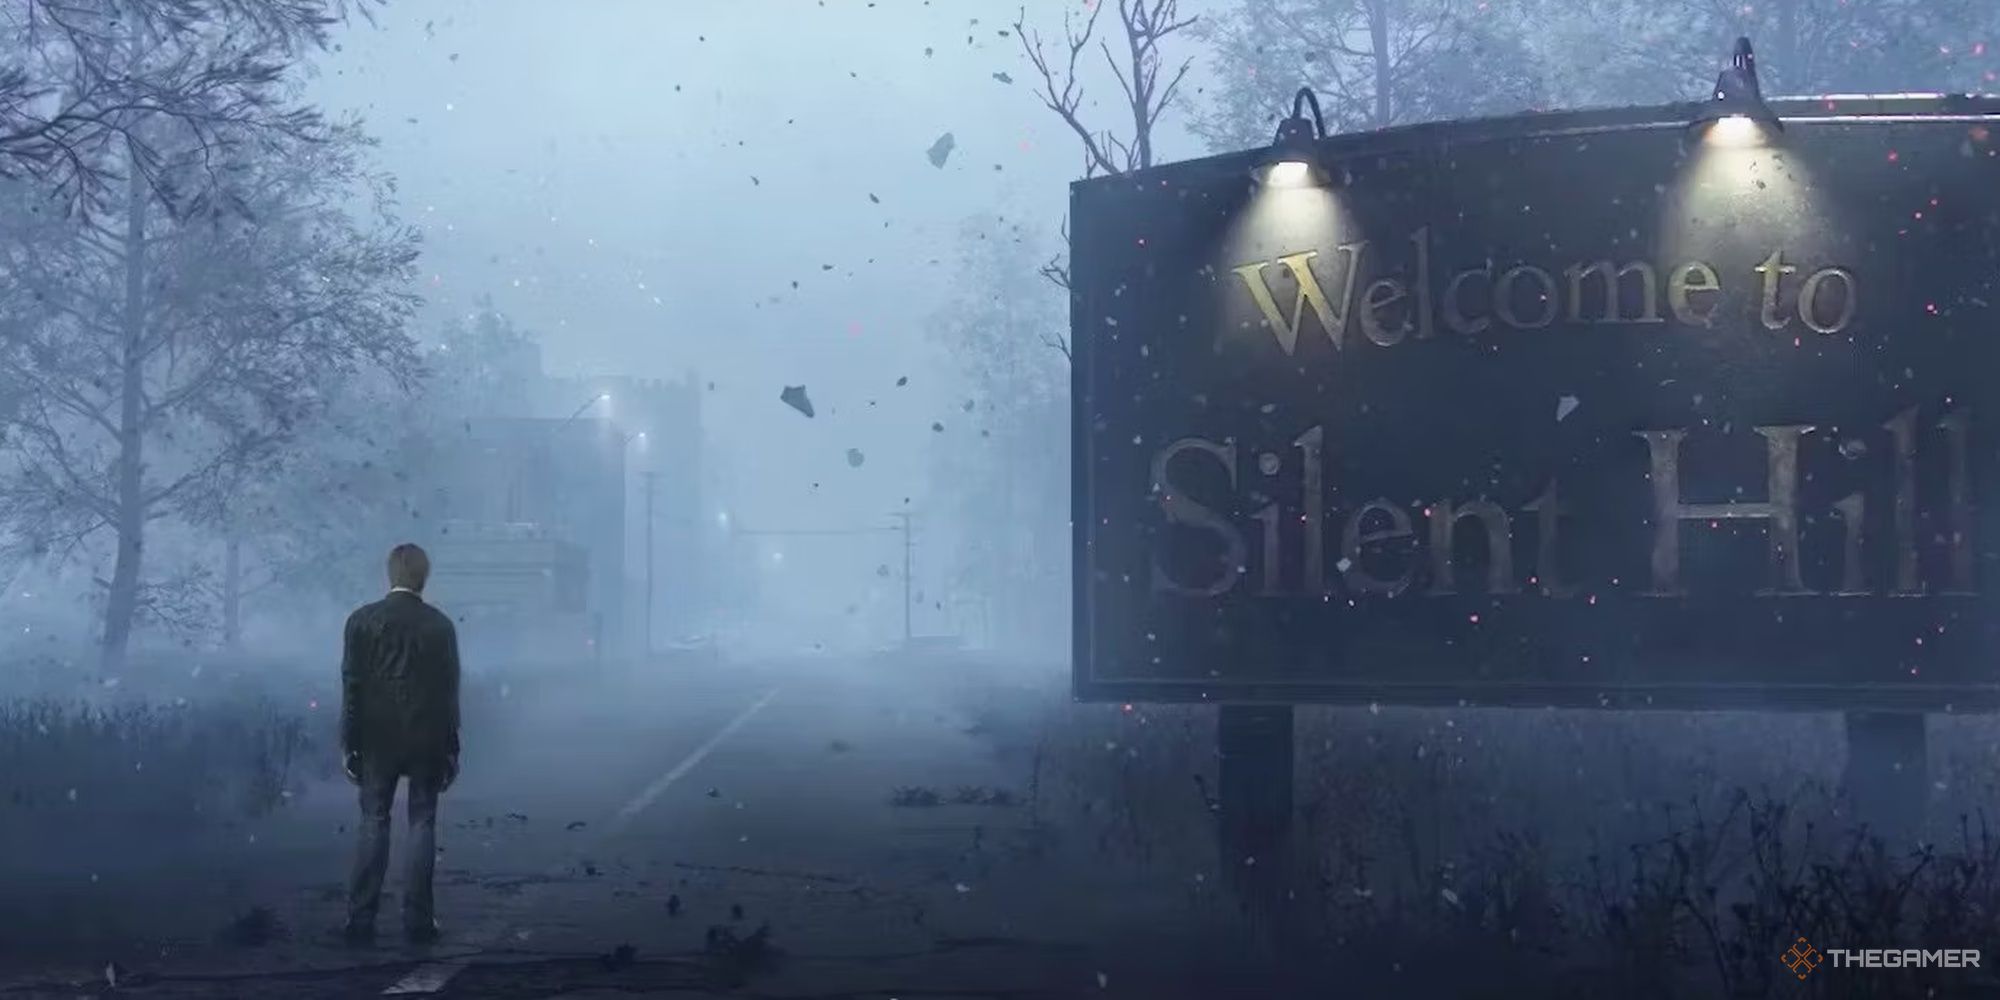 The Ending Of Silent Hill Explained